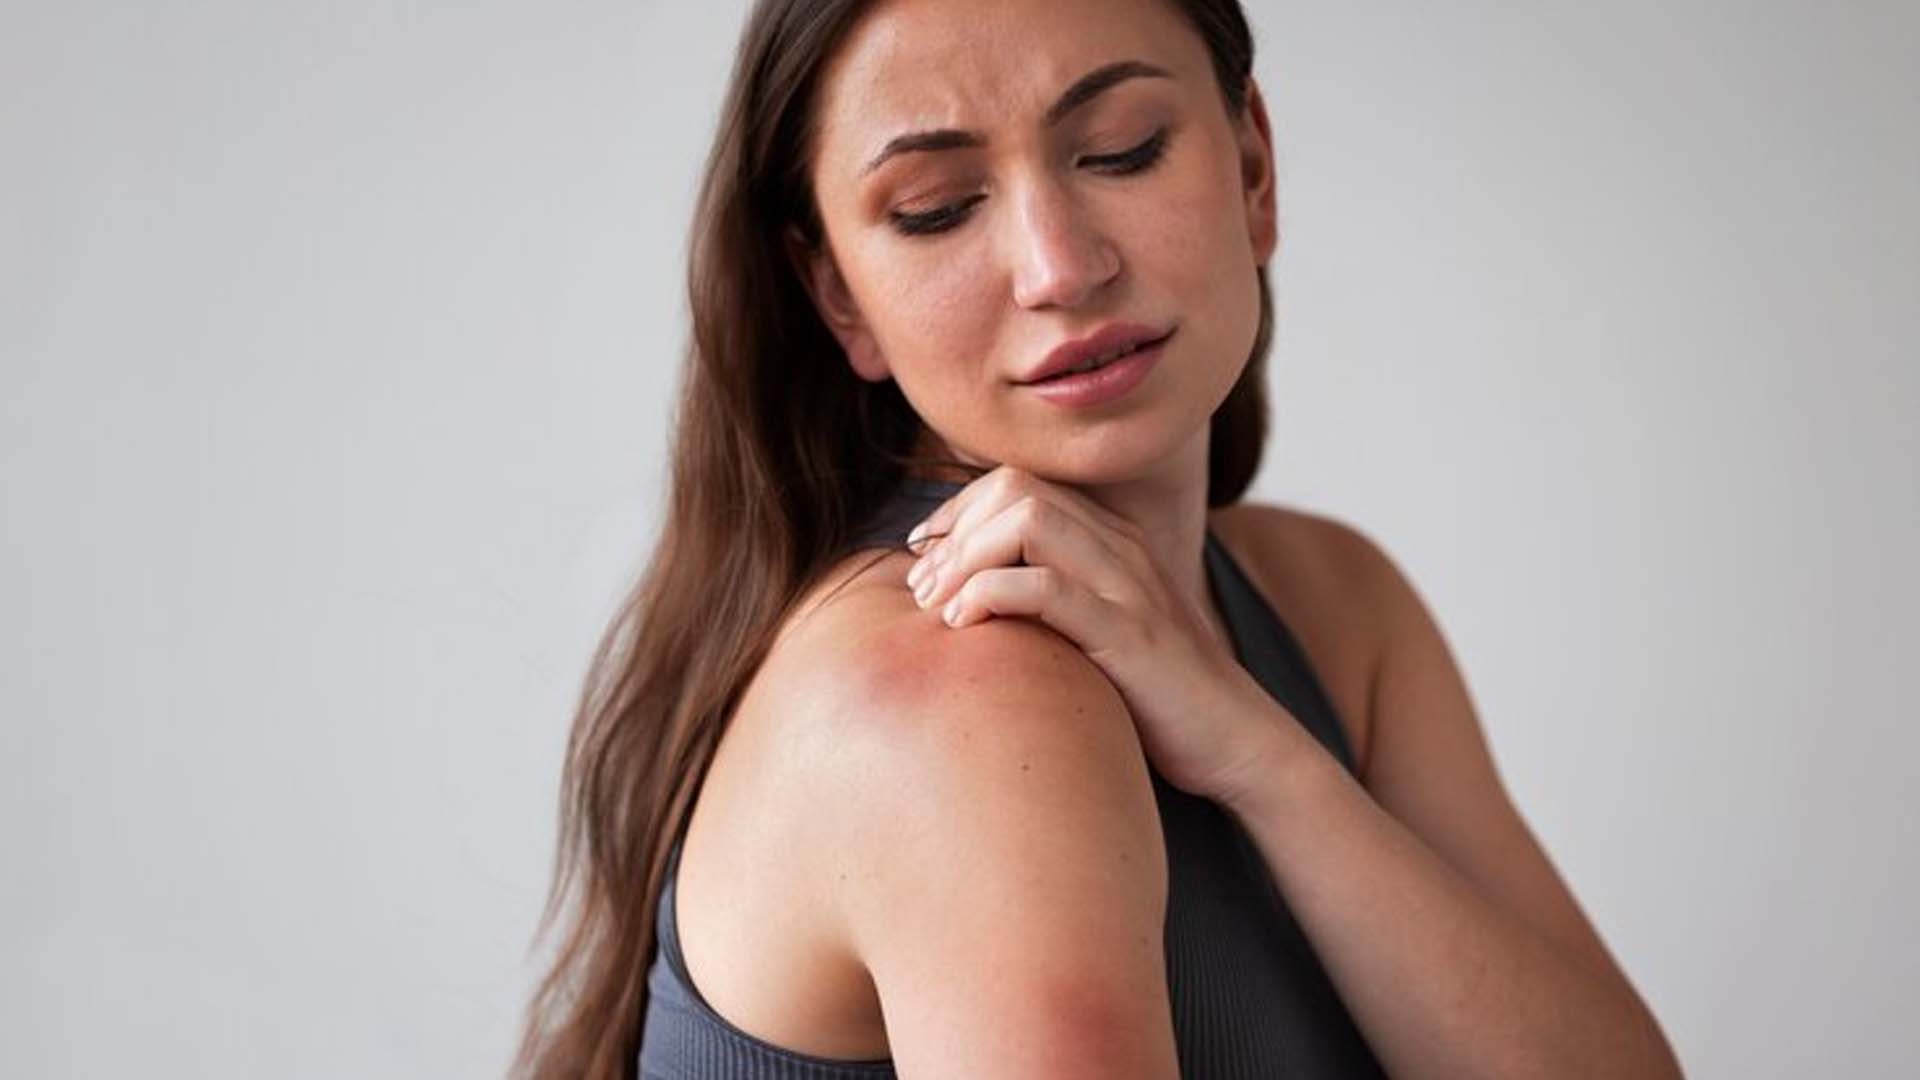 Women with Itchy Skin